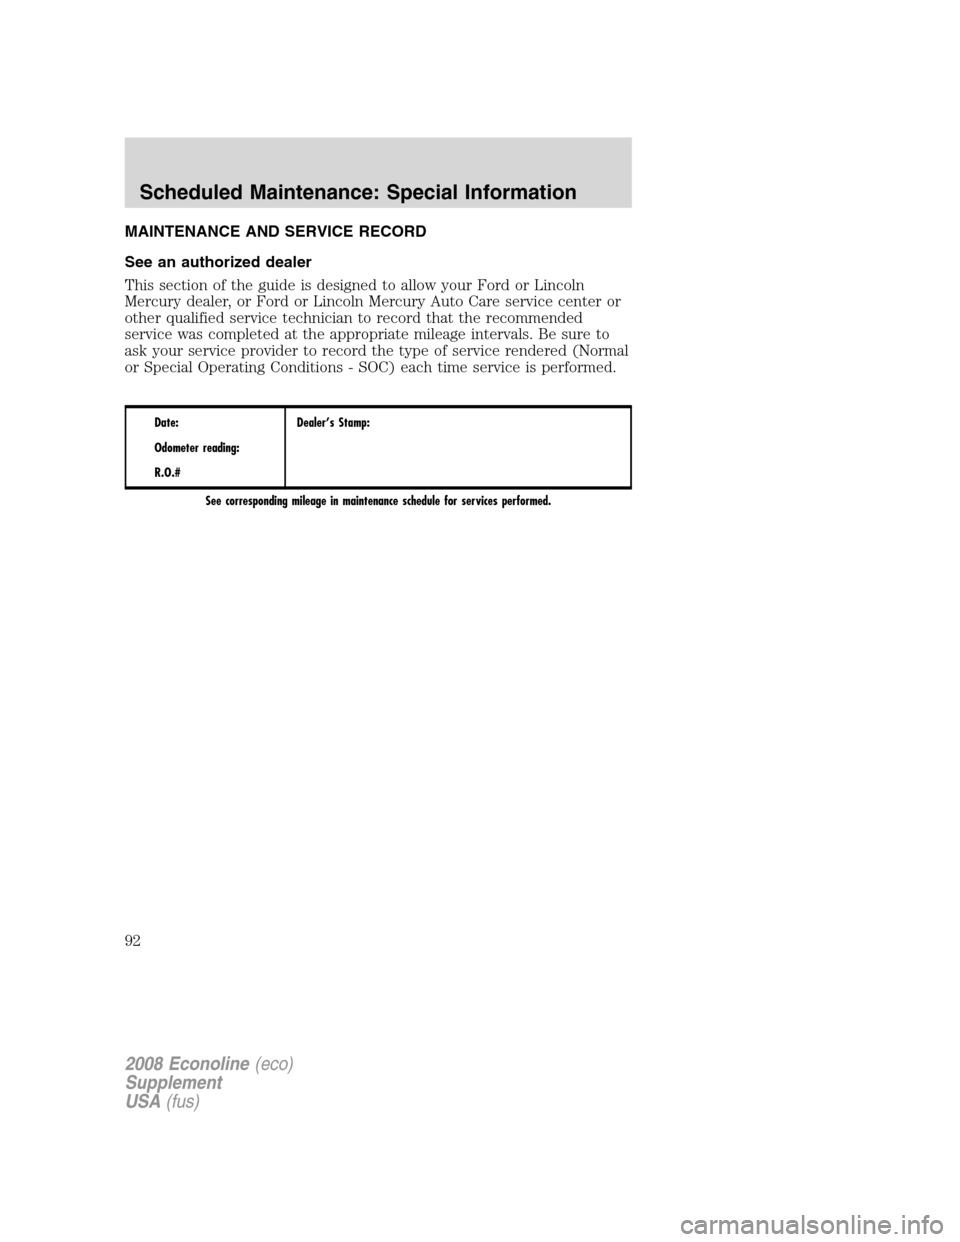 FORD SUPER DUTY 2008 2.G Diesel Supplement Manual MAINTENANCE AND SERVICE RECORD
See an authorized dealer
This section of the guide is designed to allow your Ford or Lincoln
Mercury dealer, or Ford or Lincoln Mercury Auto Care service center or
other